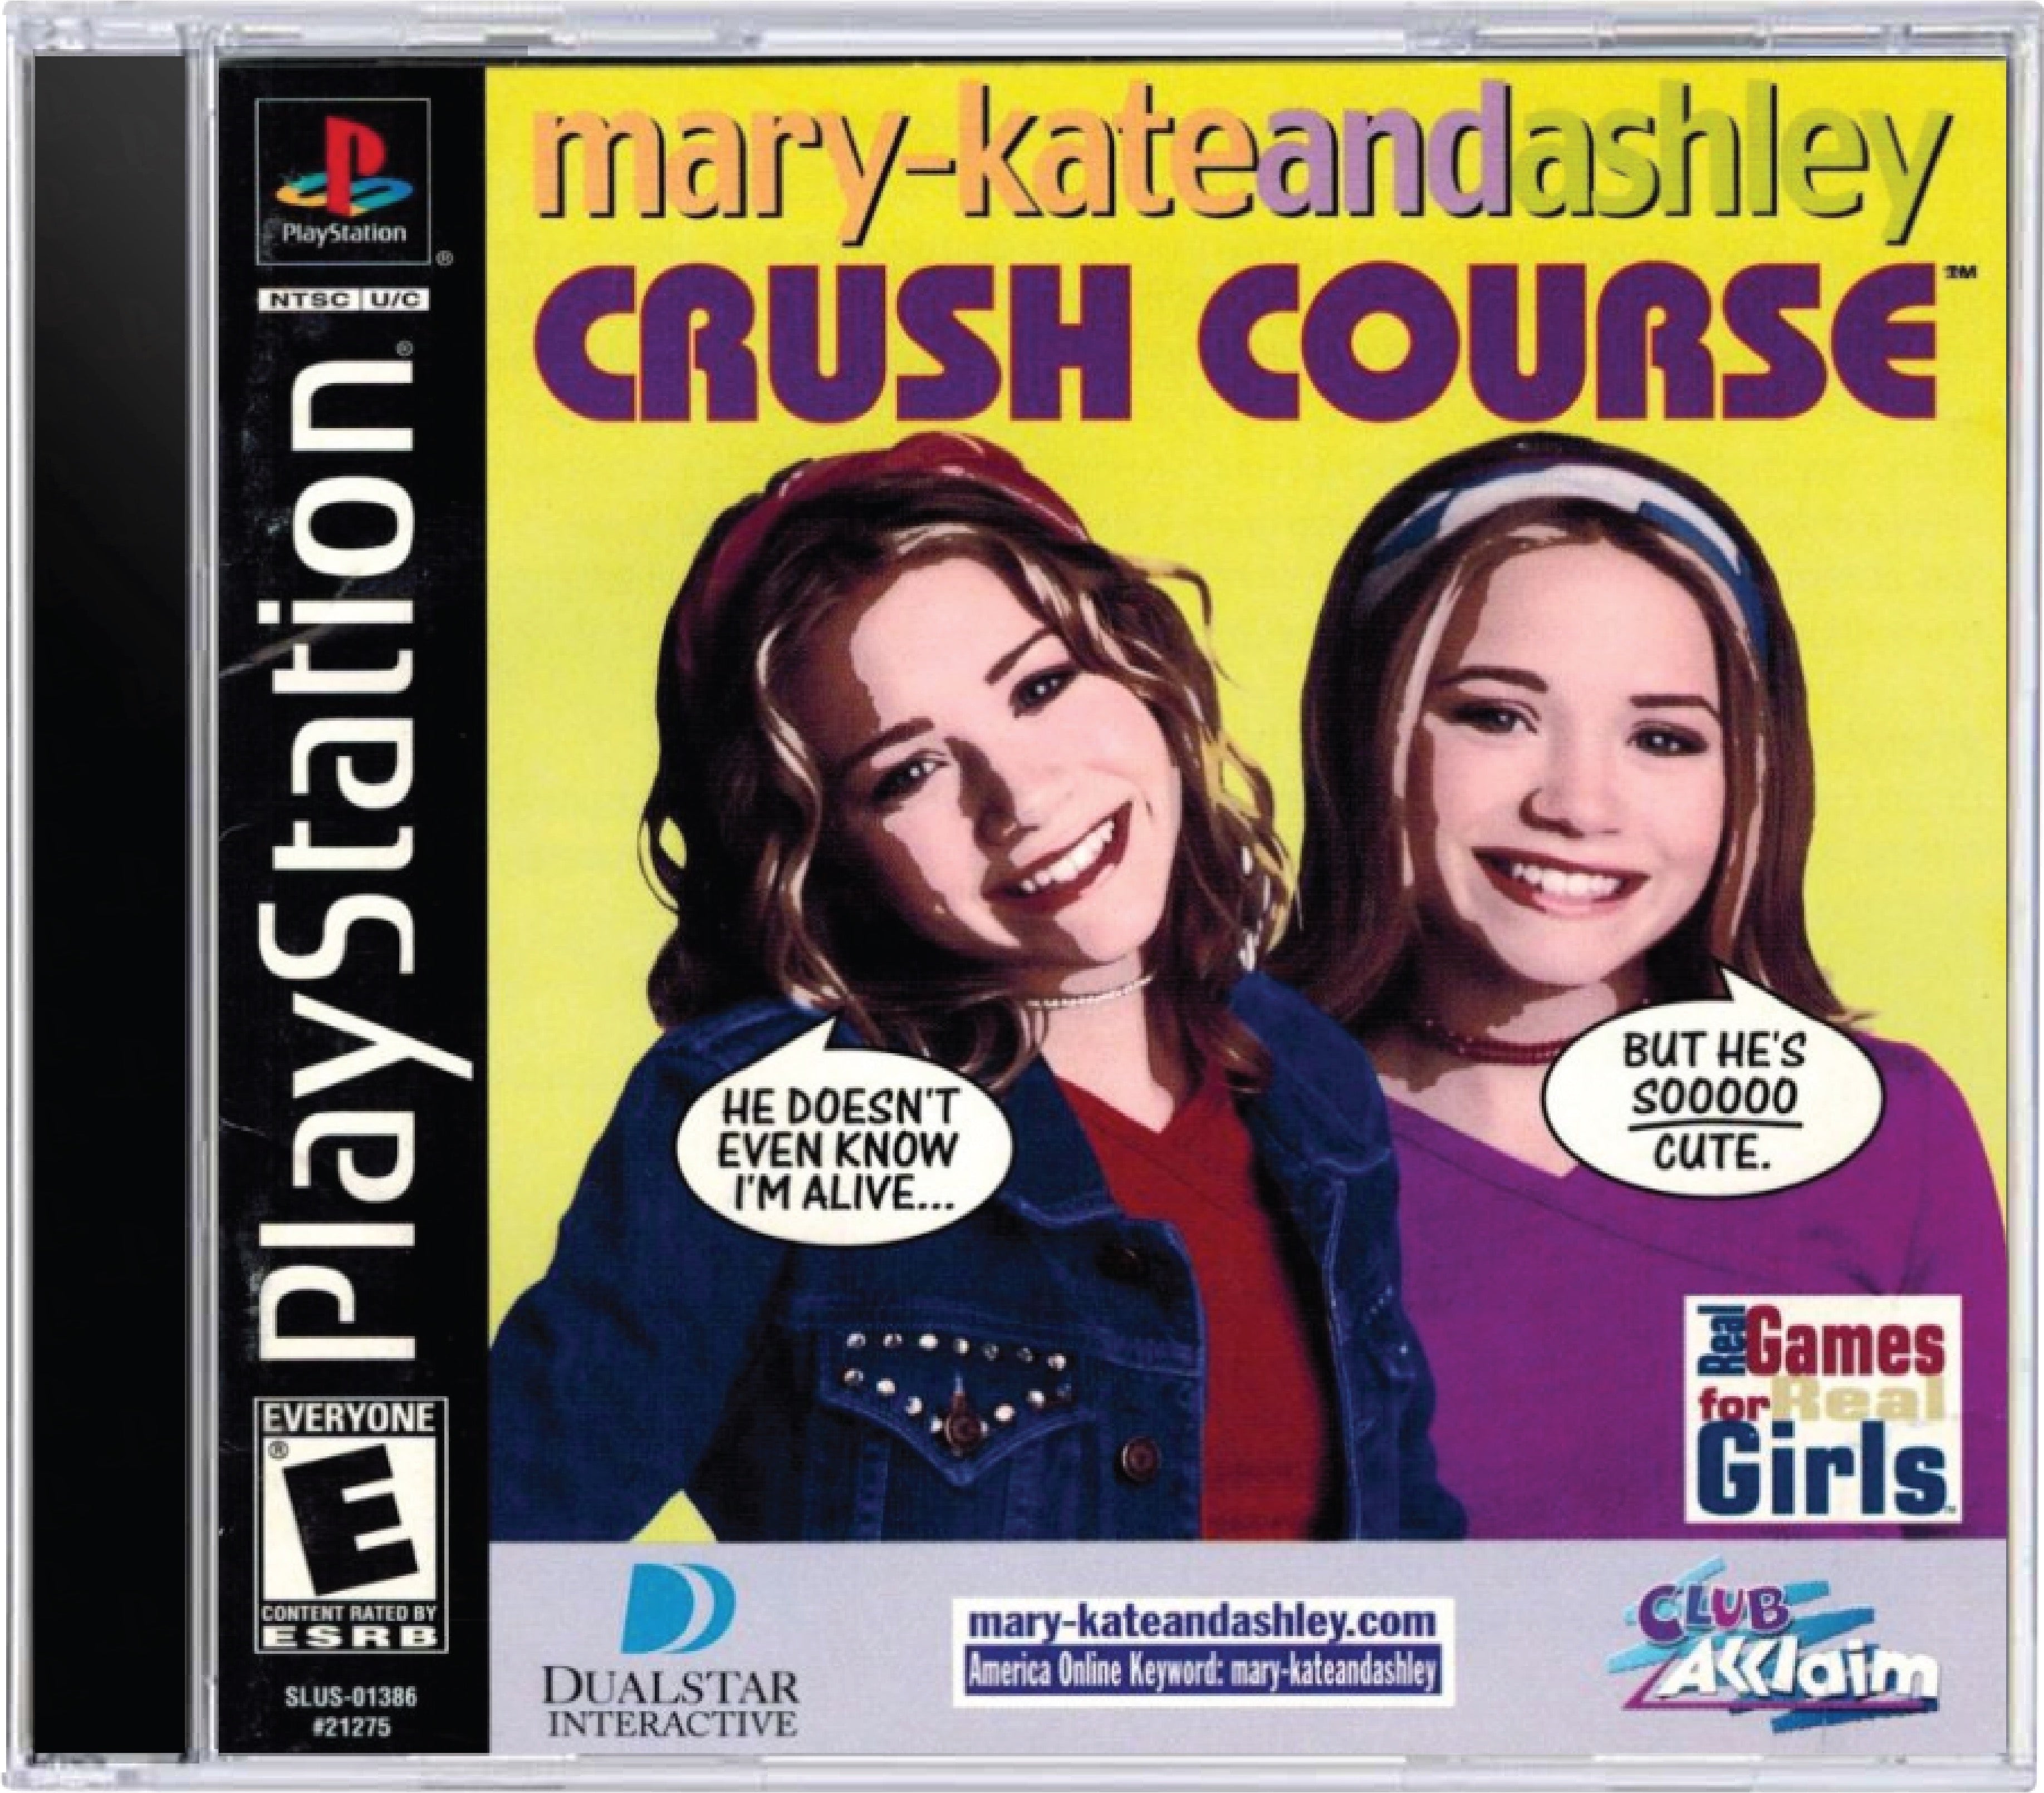 Mary-Kate and Ashley Crush Course Cover Art and Product Photo